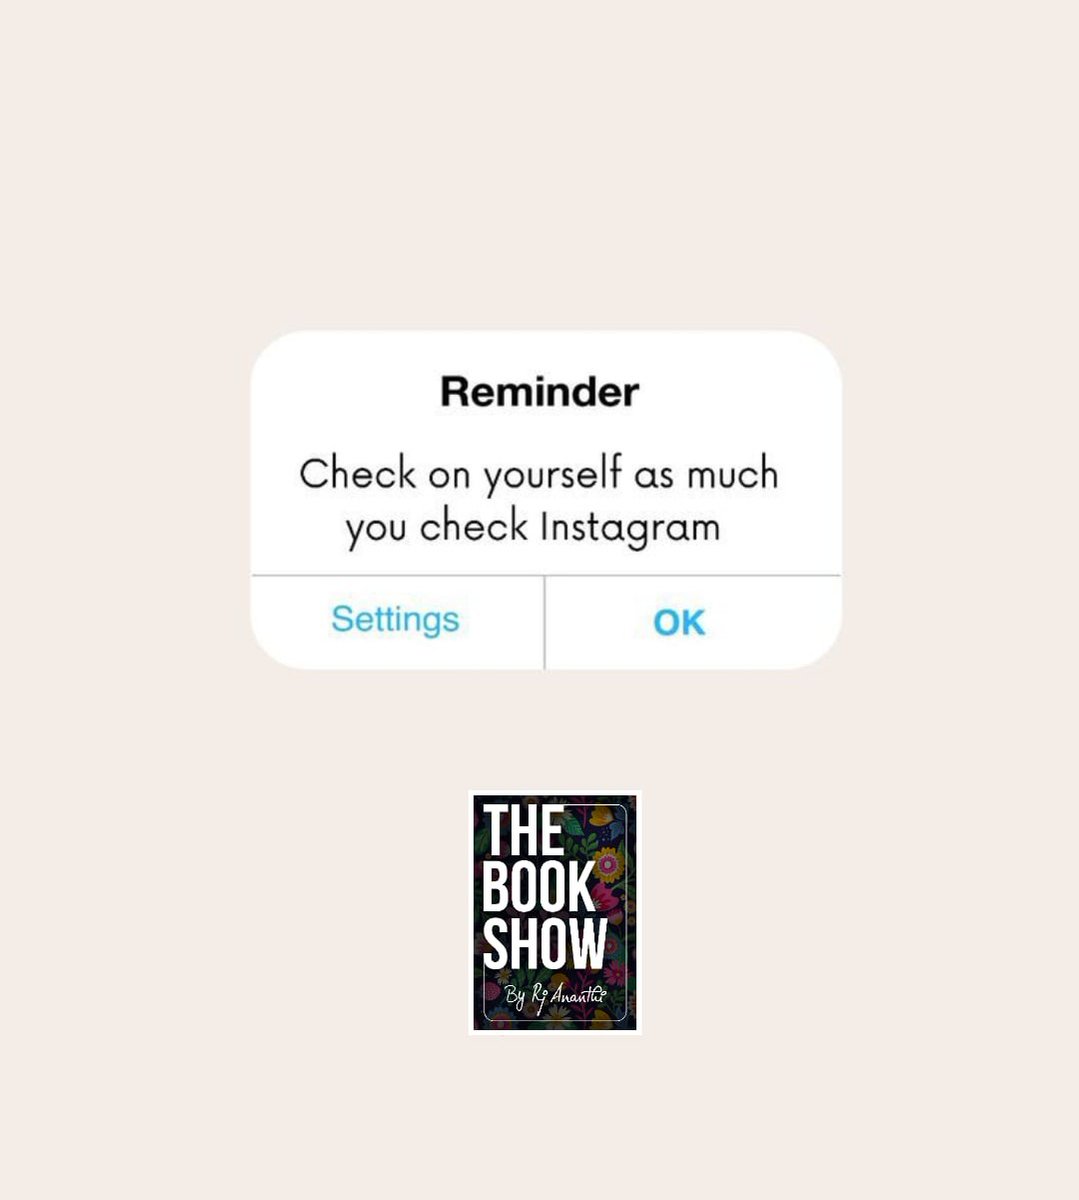 #KuttyReminder
Check on you.
Check on your ppl.
Check on your feelings!

It's okay, paathukalam:)

#TheBookShow #rjananthi #Bookstagram #bookcommunity